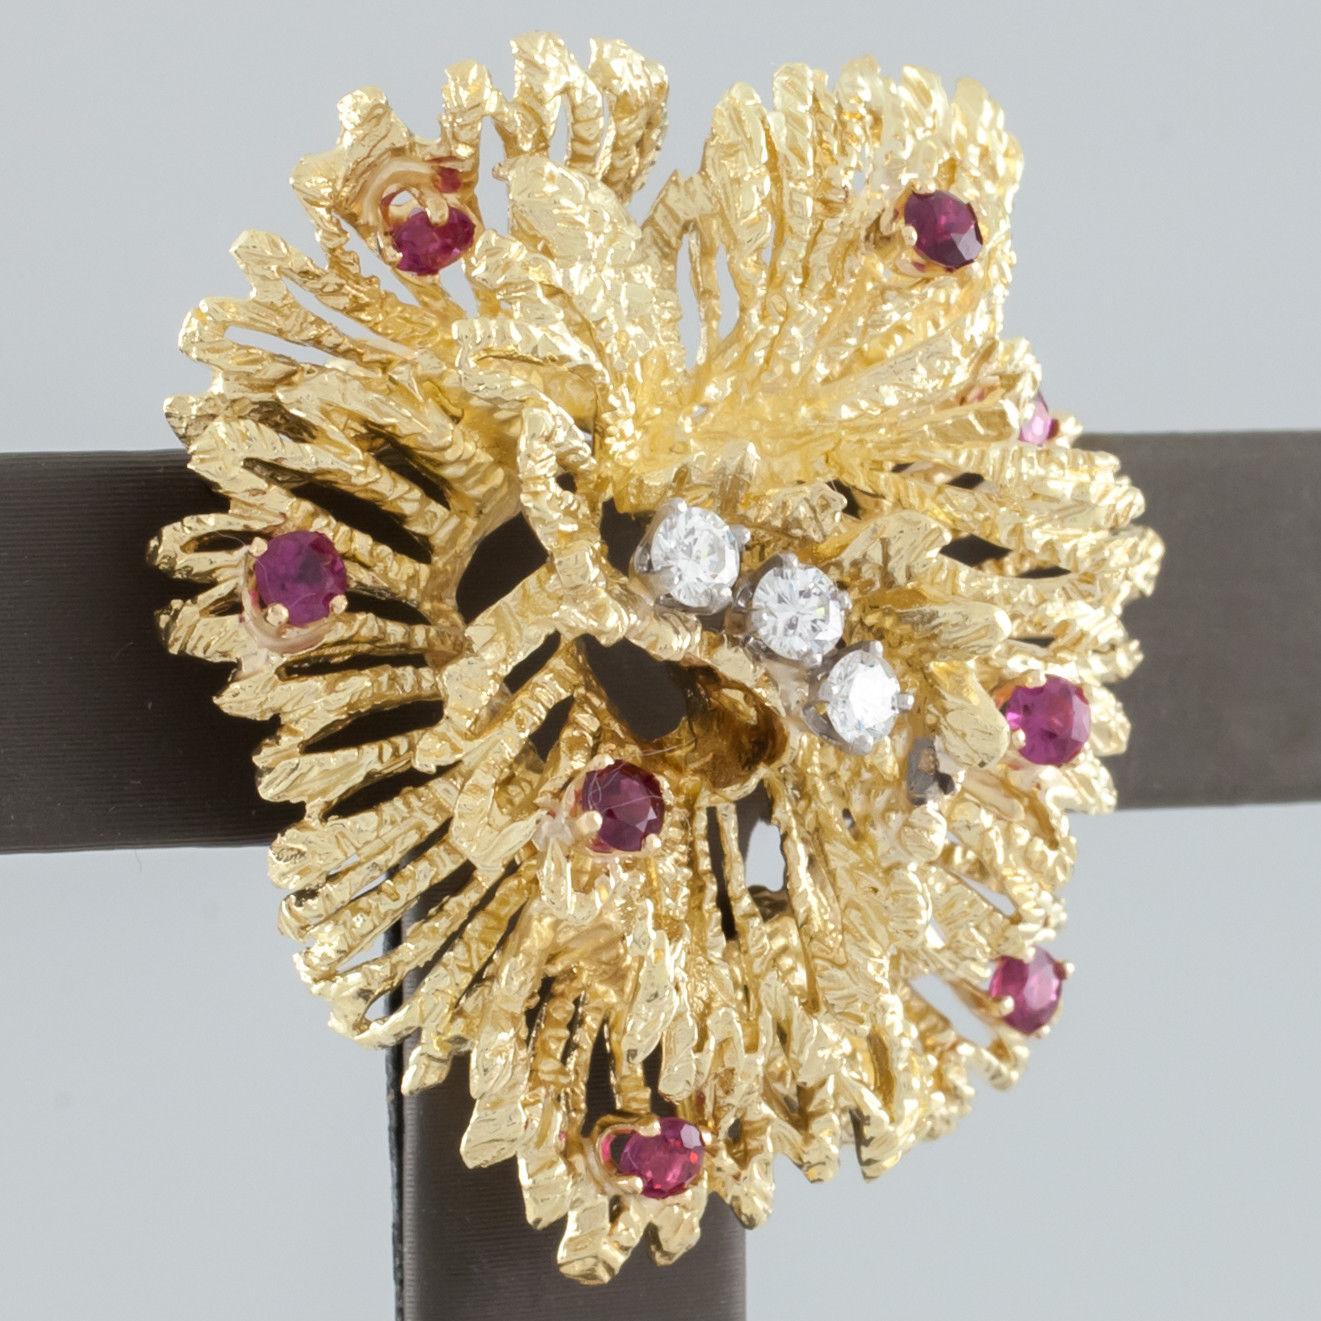 Gorgeous Tiffany & Co. Brooch
Features Floral or Anemone Design with Three Center Diamond Solitaires and Round Rubies Throughout
Brooch is Approximately 38 mm Wide x 36 mm Long
Total Mass = 17.4 grams
Piece is in Good Condition. Shows Few Signs of